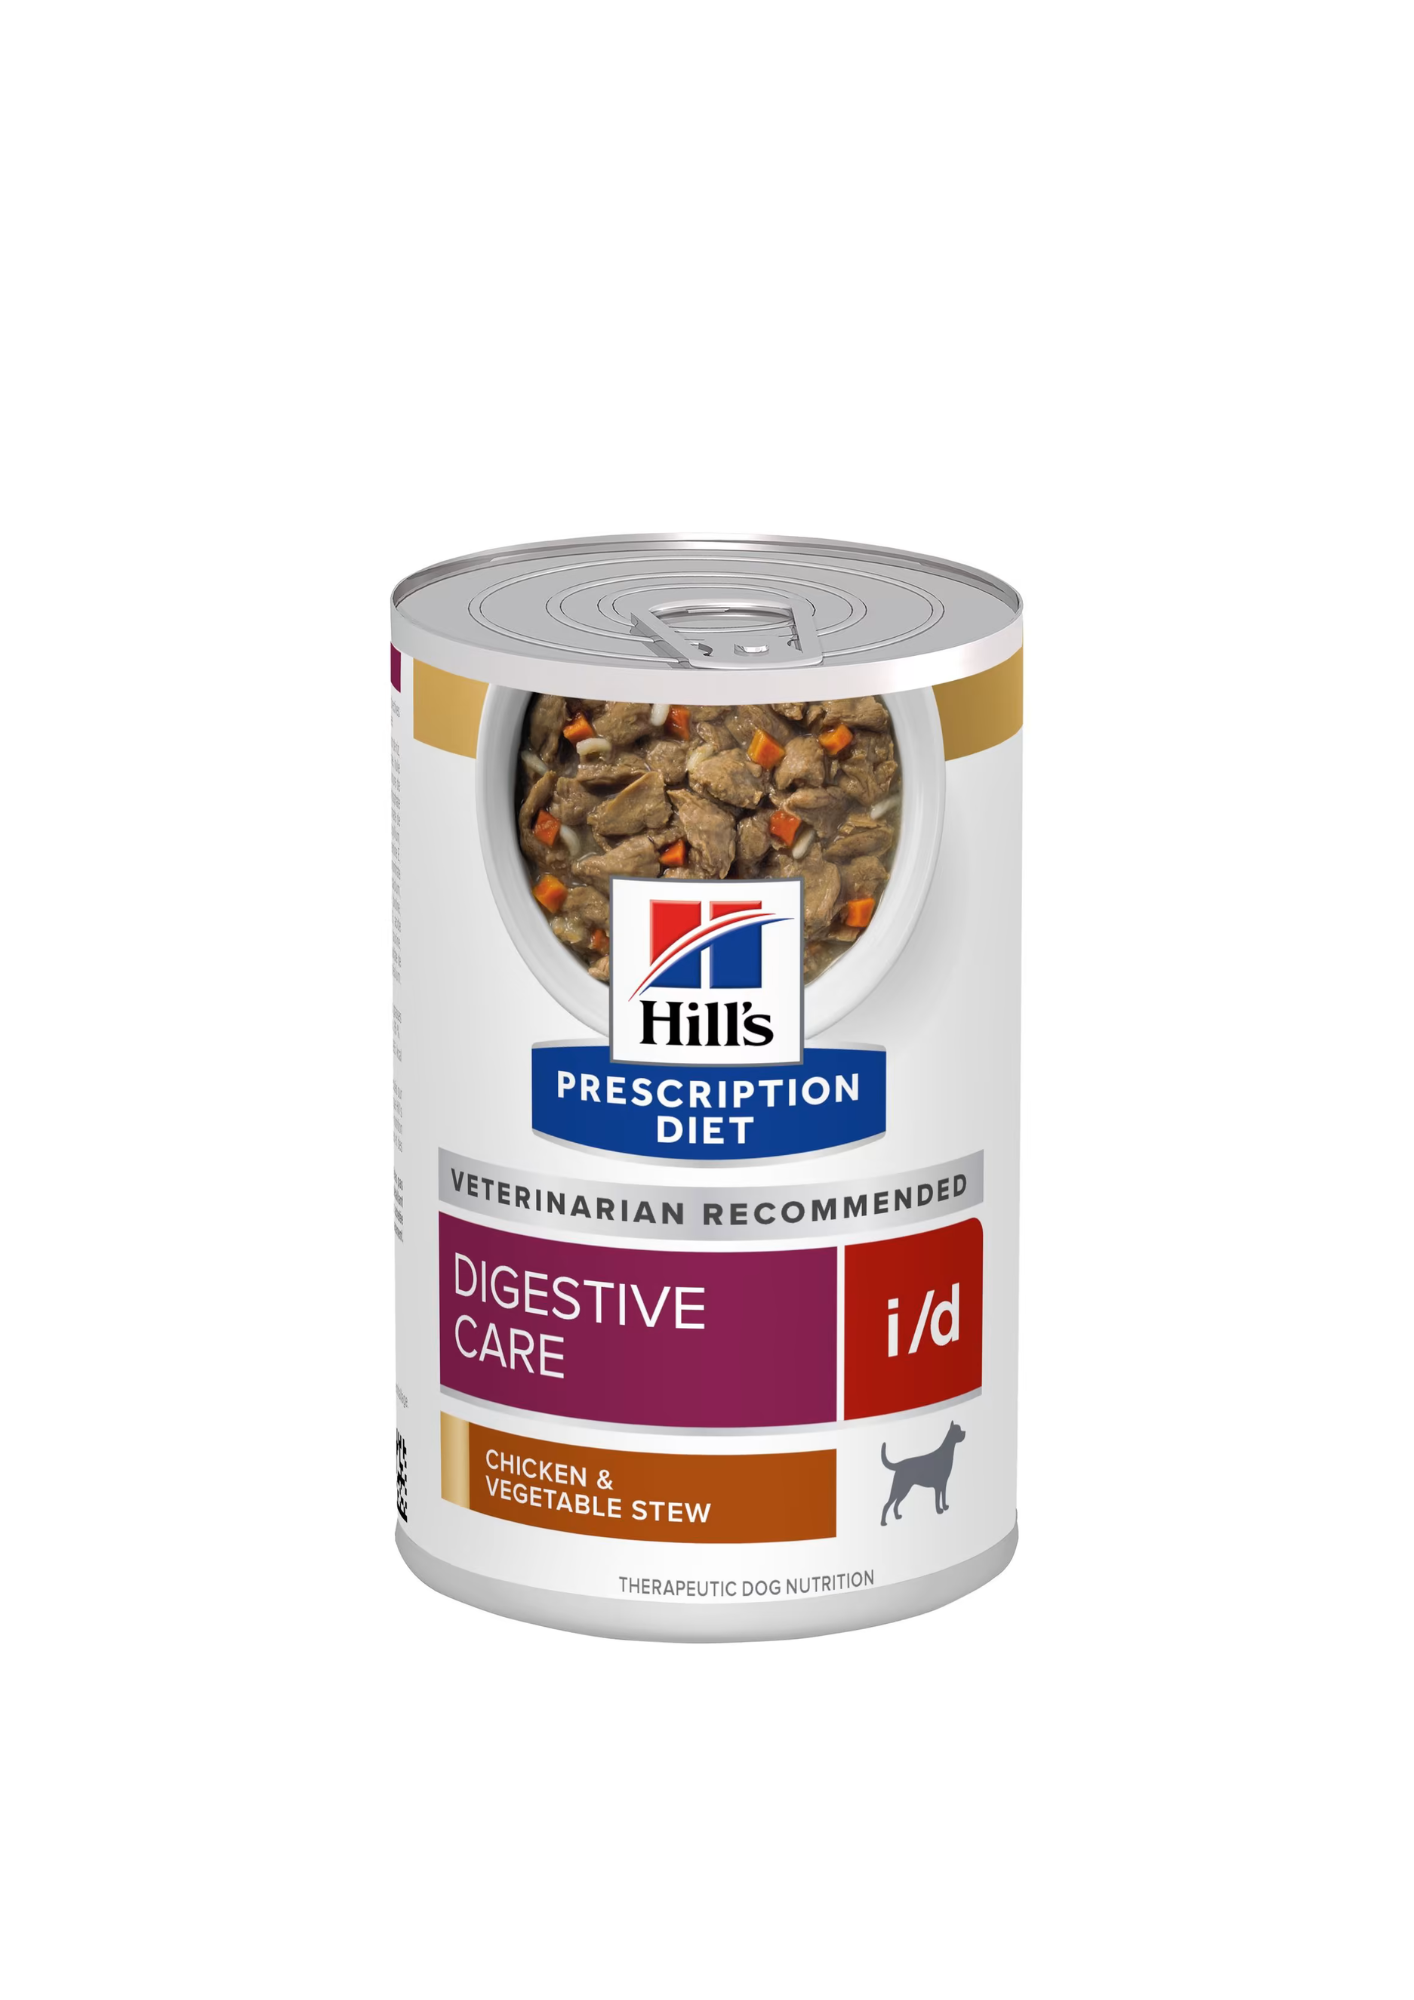 Hill's i/d Digestive Care Wet Dog Food With Chicken & Vegetable Stew, 354g